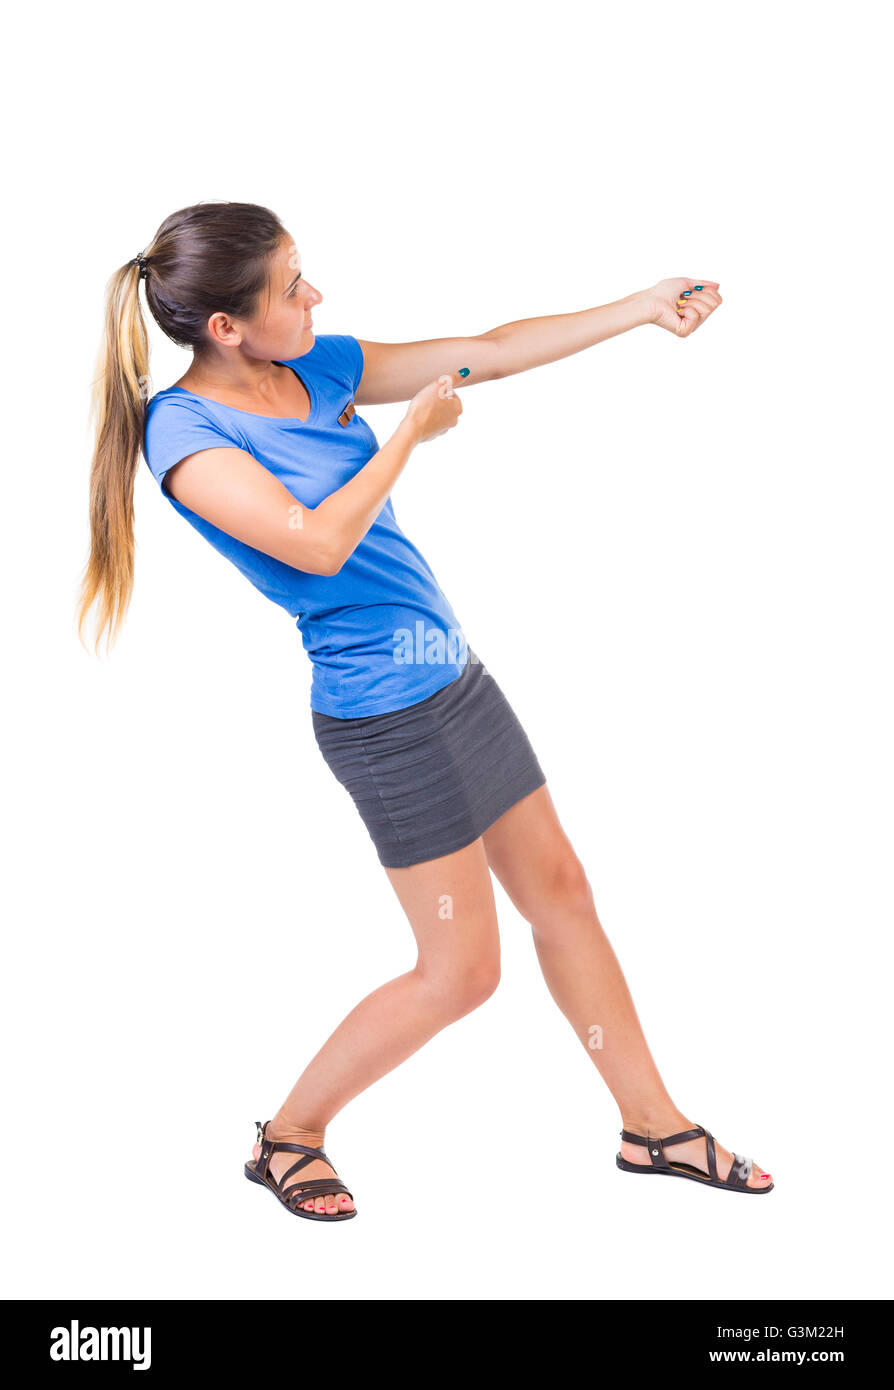 Woman pulling something heavy Cut Out Stock Images & Pictures - Alamy